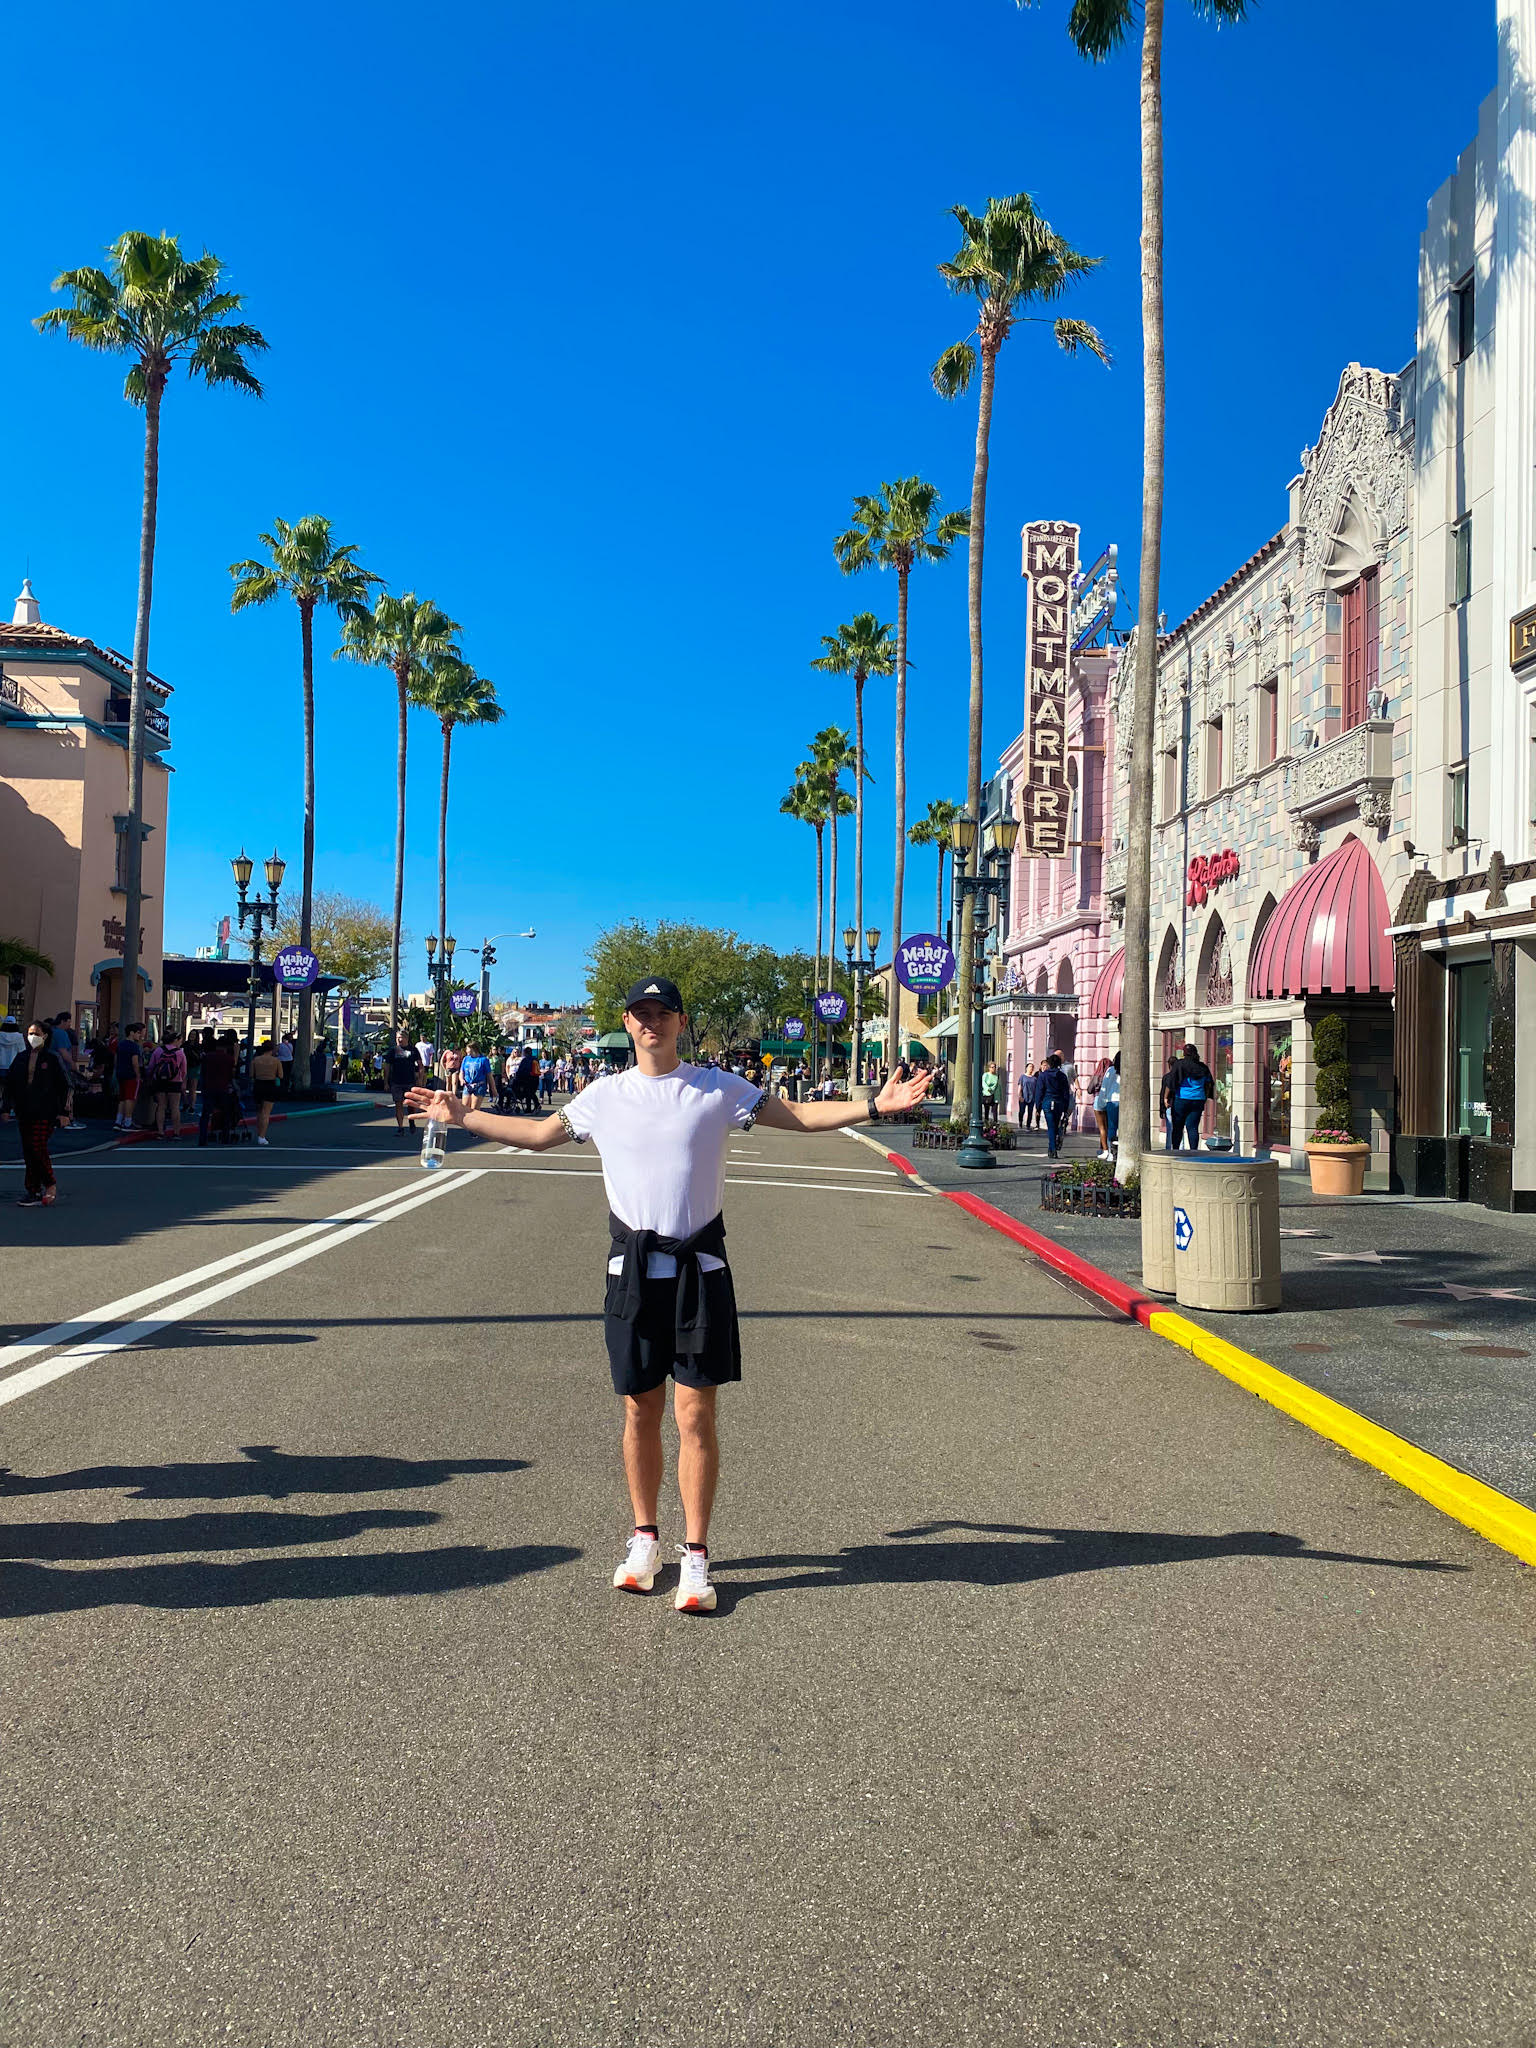 The Ultimate Guide to Universal Orlando for First Timers